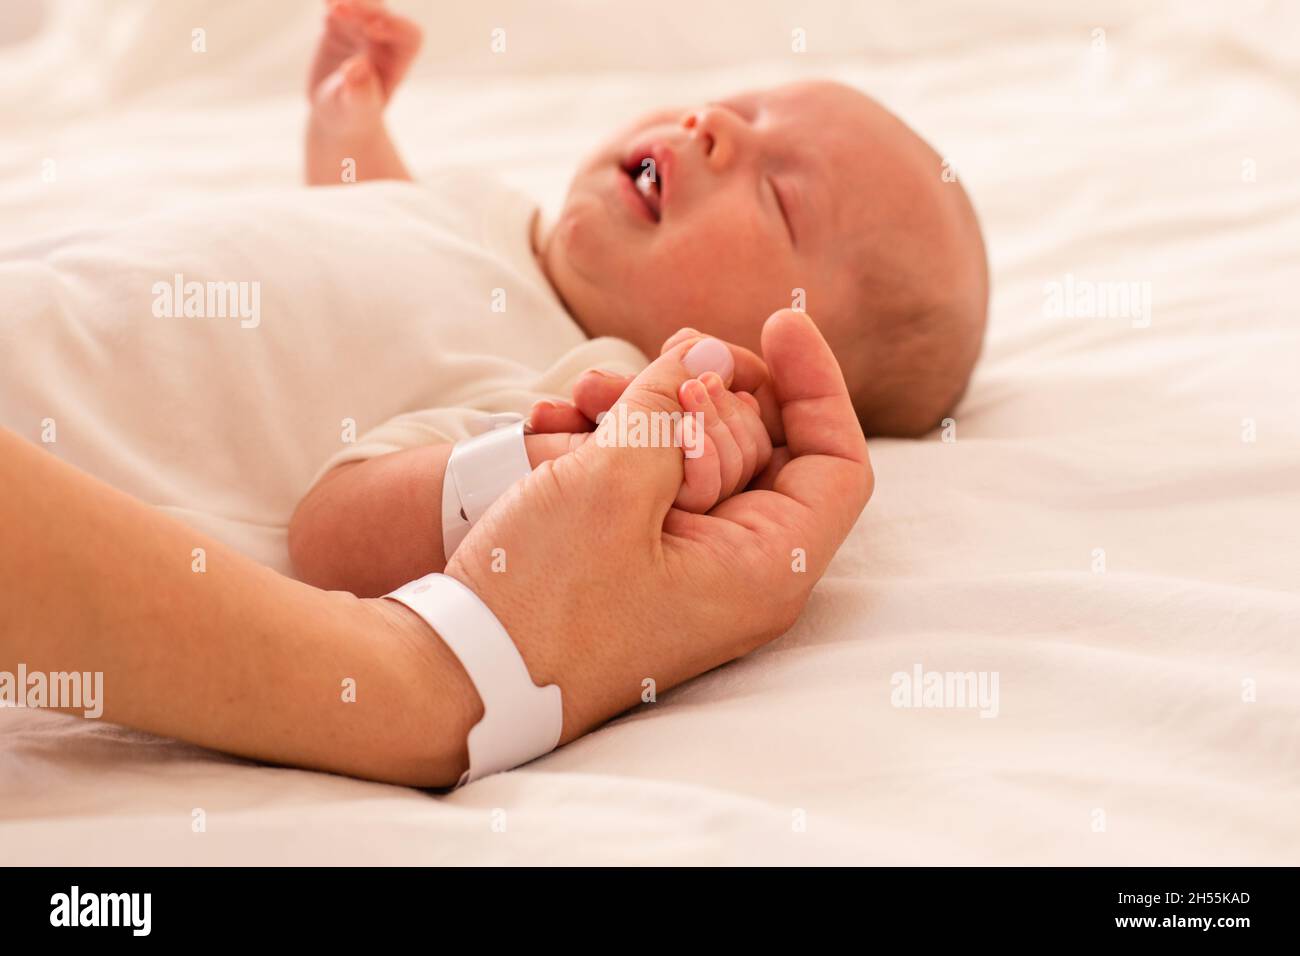 Newborn baby and mom are holding hands Stock Photo